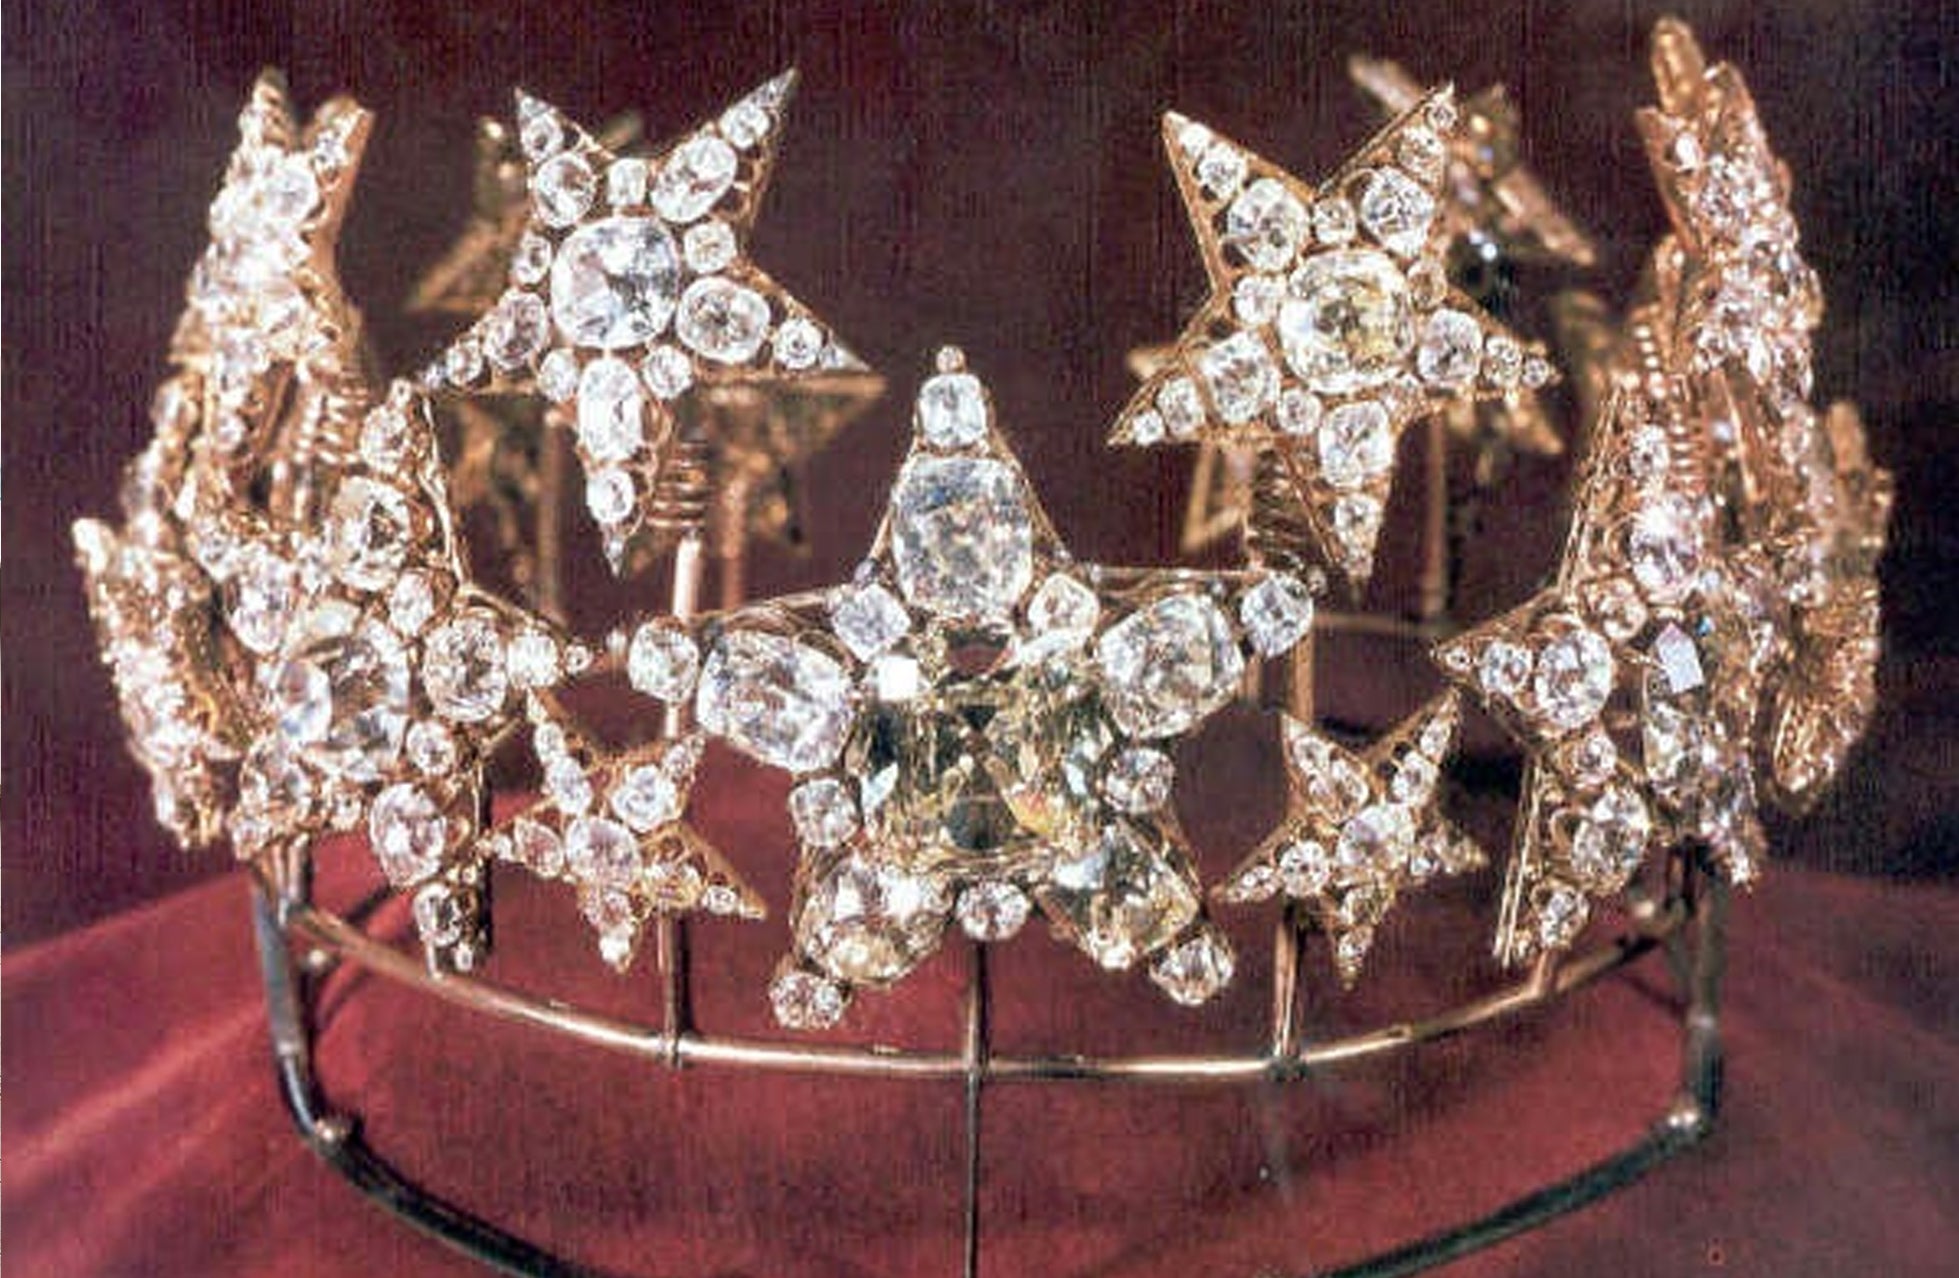 Photograph of the Diadem of the Stars, crafted in 1853 for the then Queen Consort of Portugal Maria Pia of Savoy